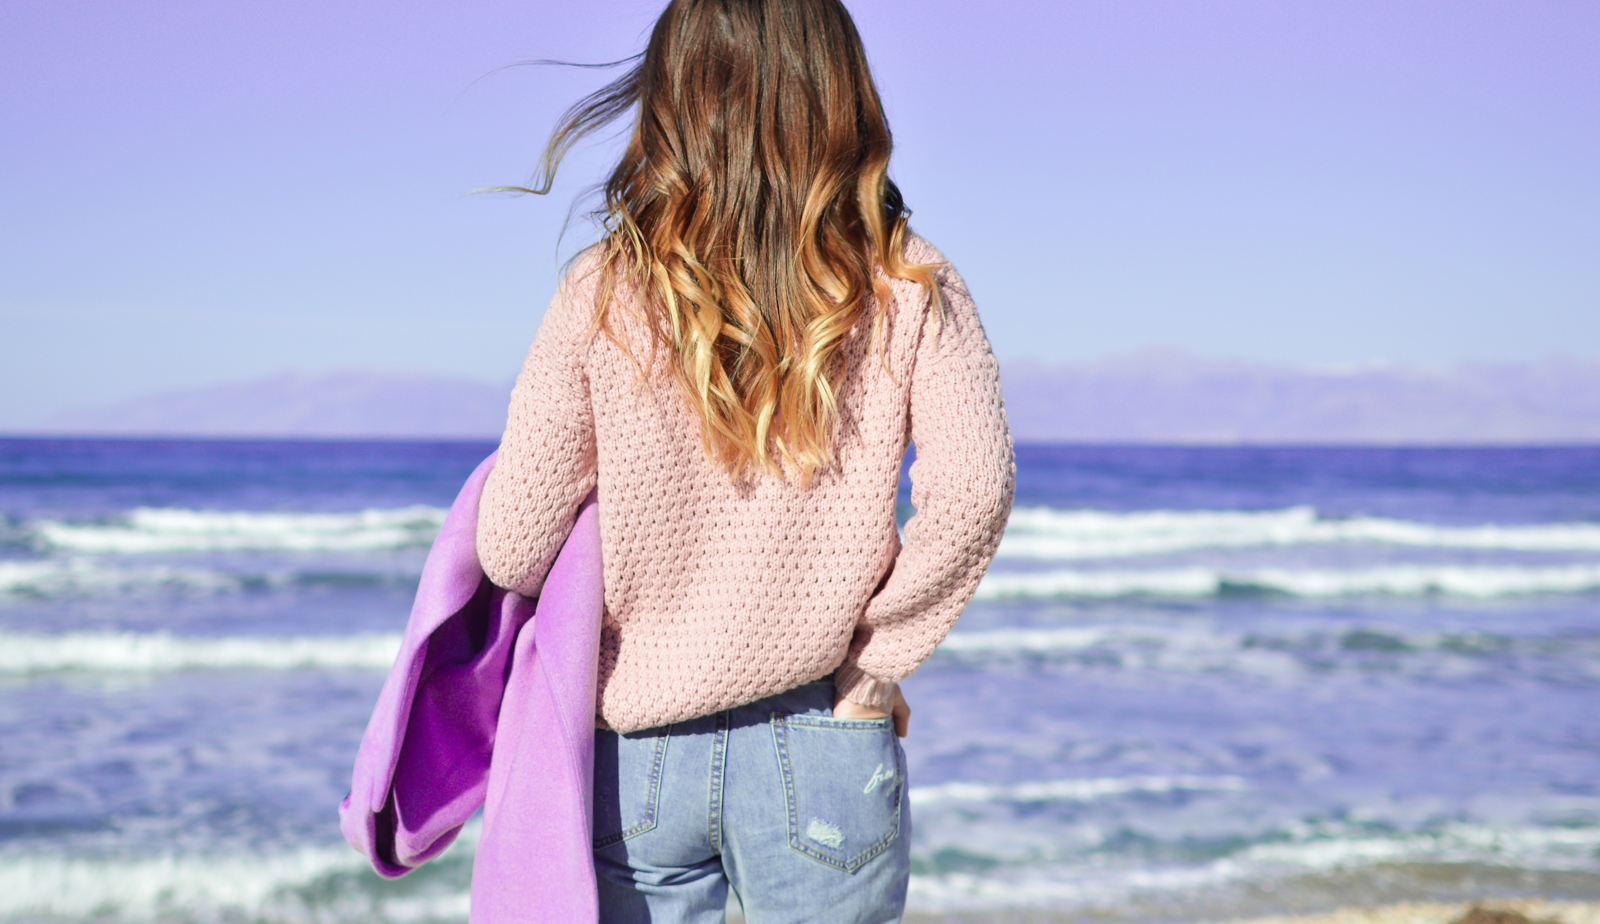 girl with hombre hair and a knit sweater walking towards the ocean holding a jean jacket